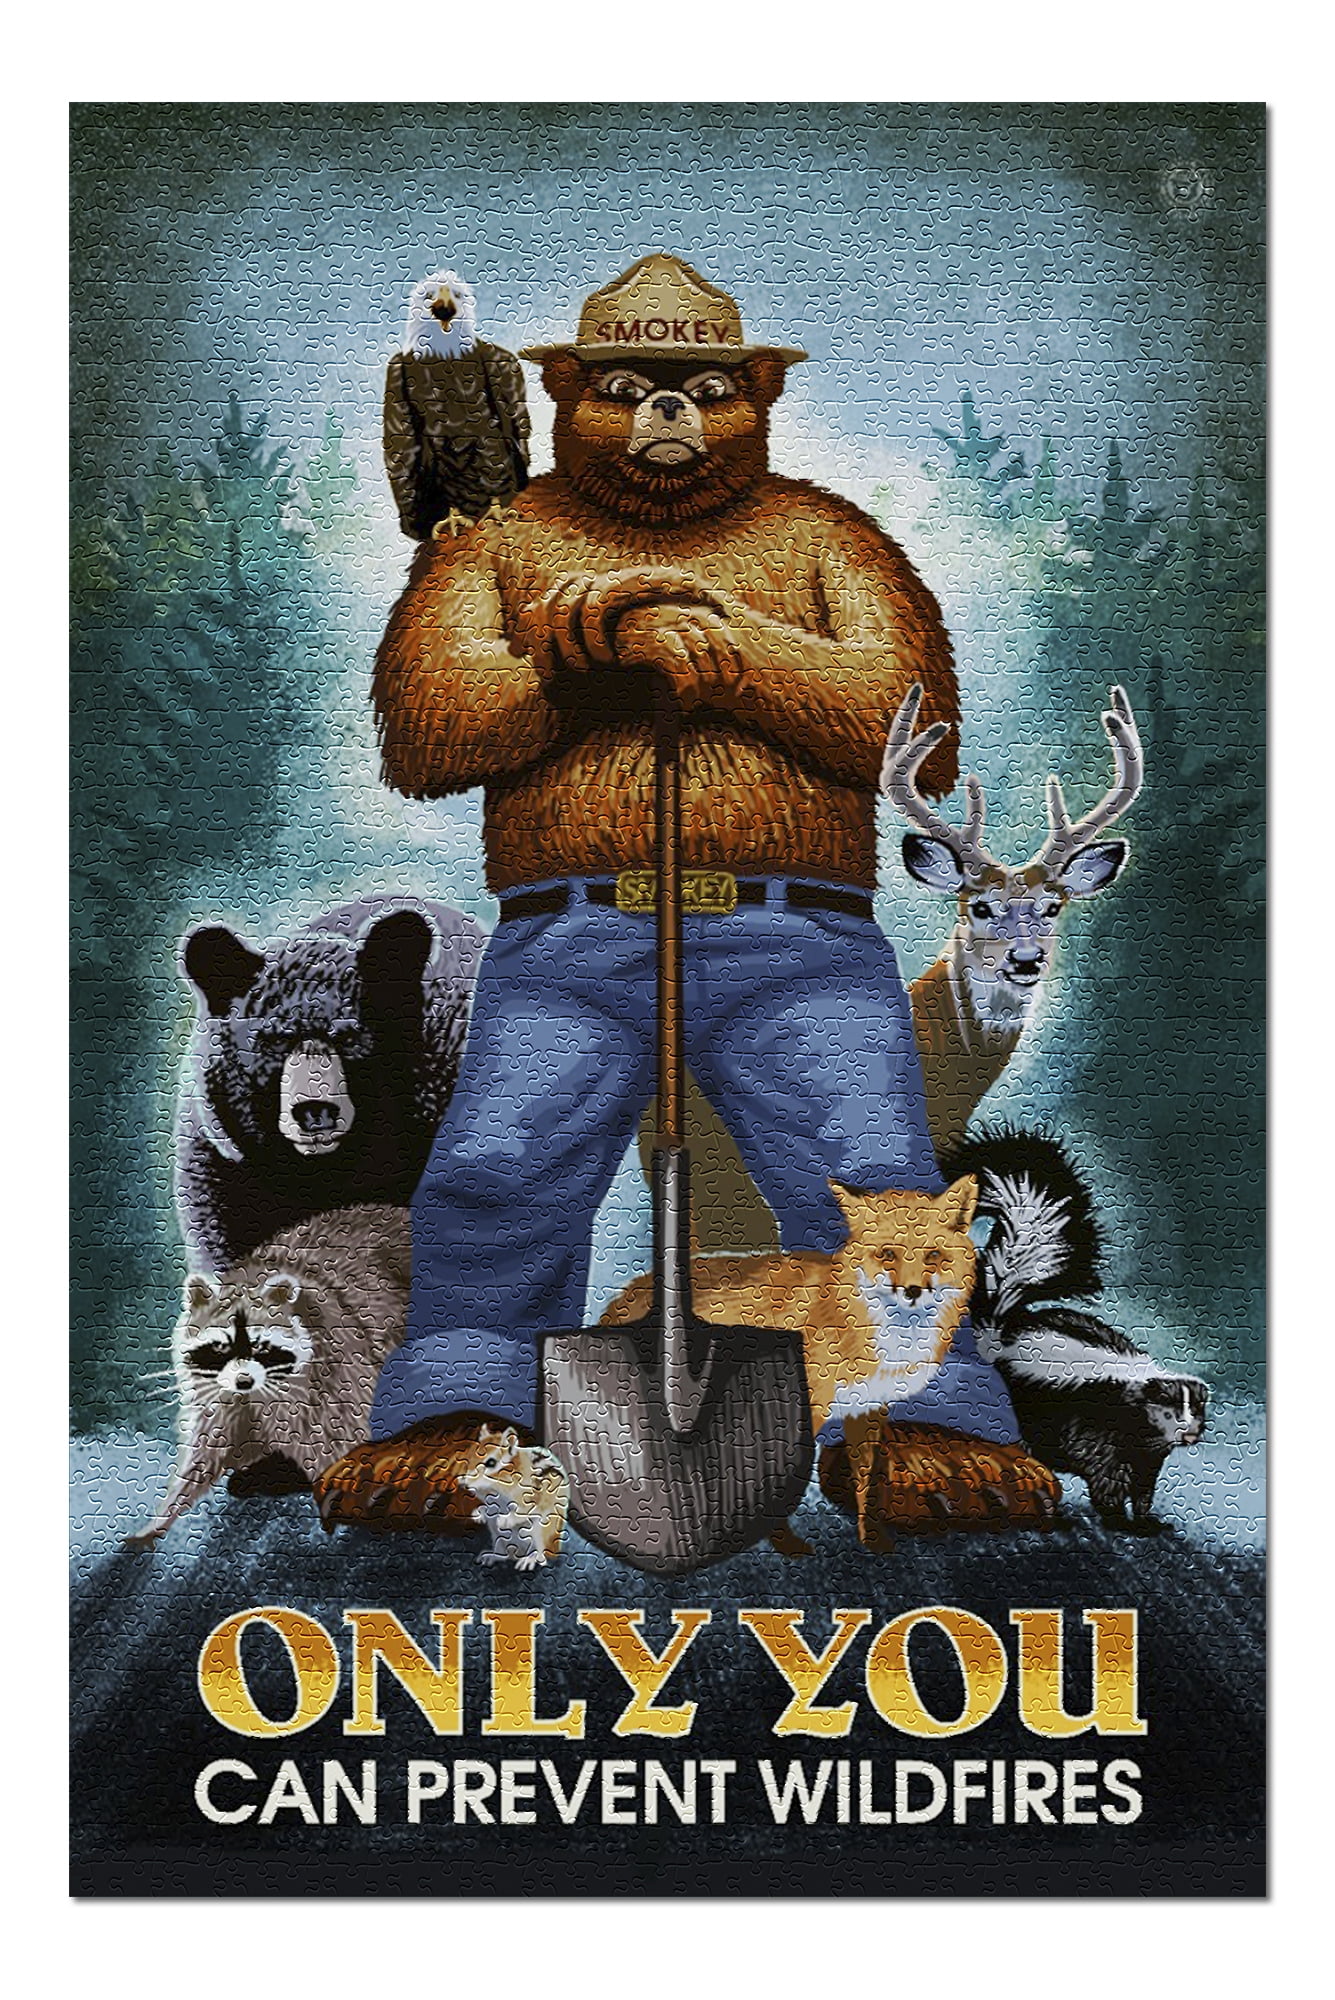 smokey-bear-only-you-can-prevent-wildfires-20x30-premium-1000-piece